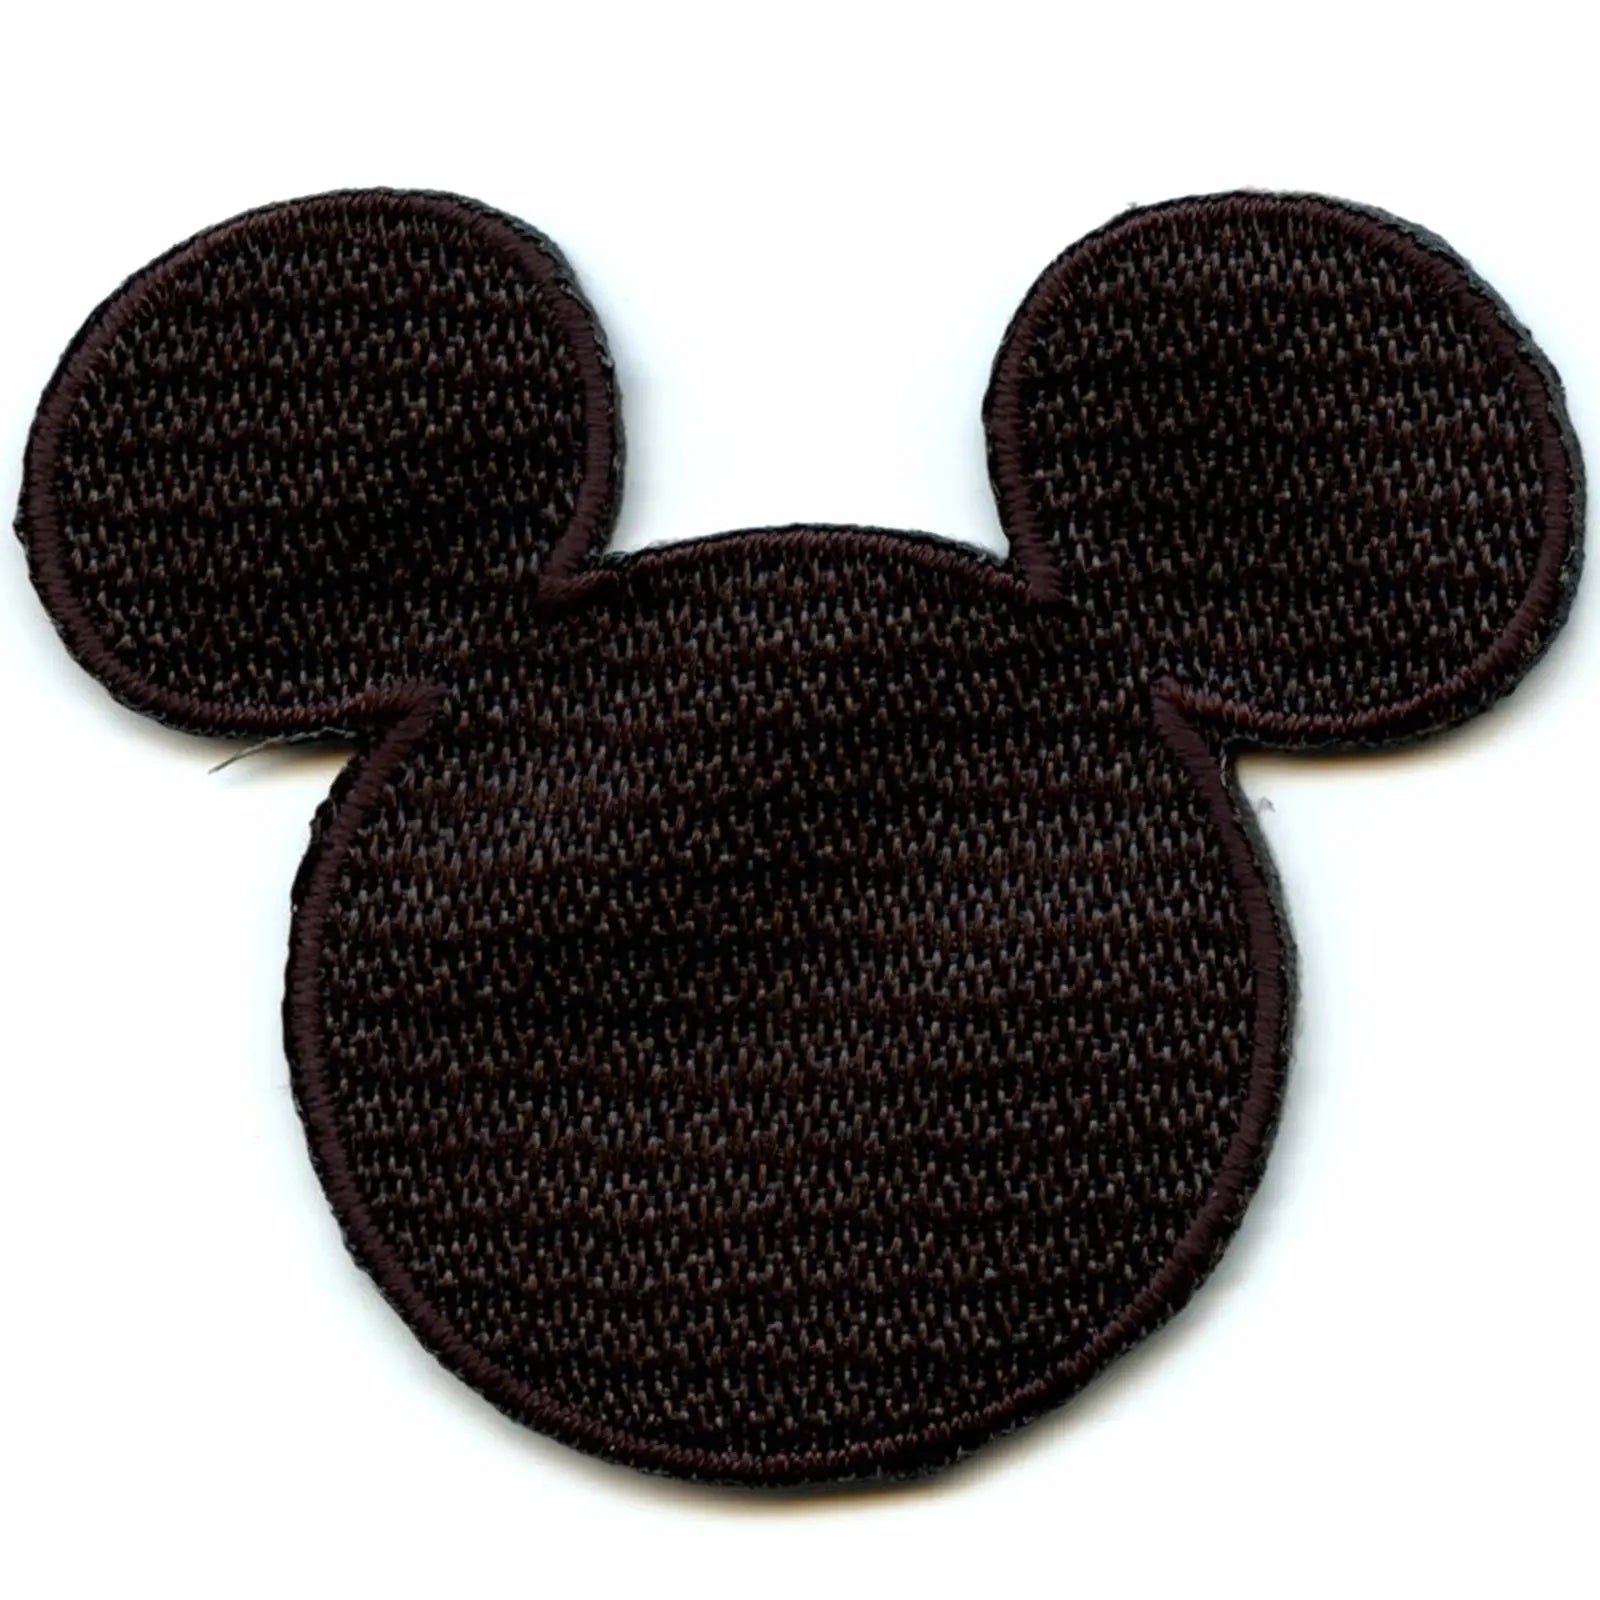 Iron on Patches MICKEY MOUSE XL mickey Standing Disney Black 20x15cm  Application Embroided Badges 